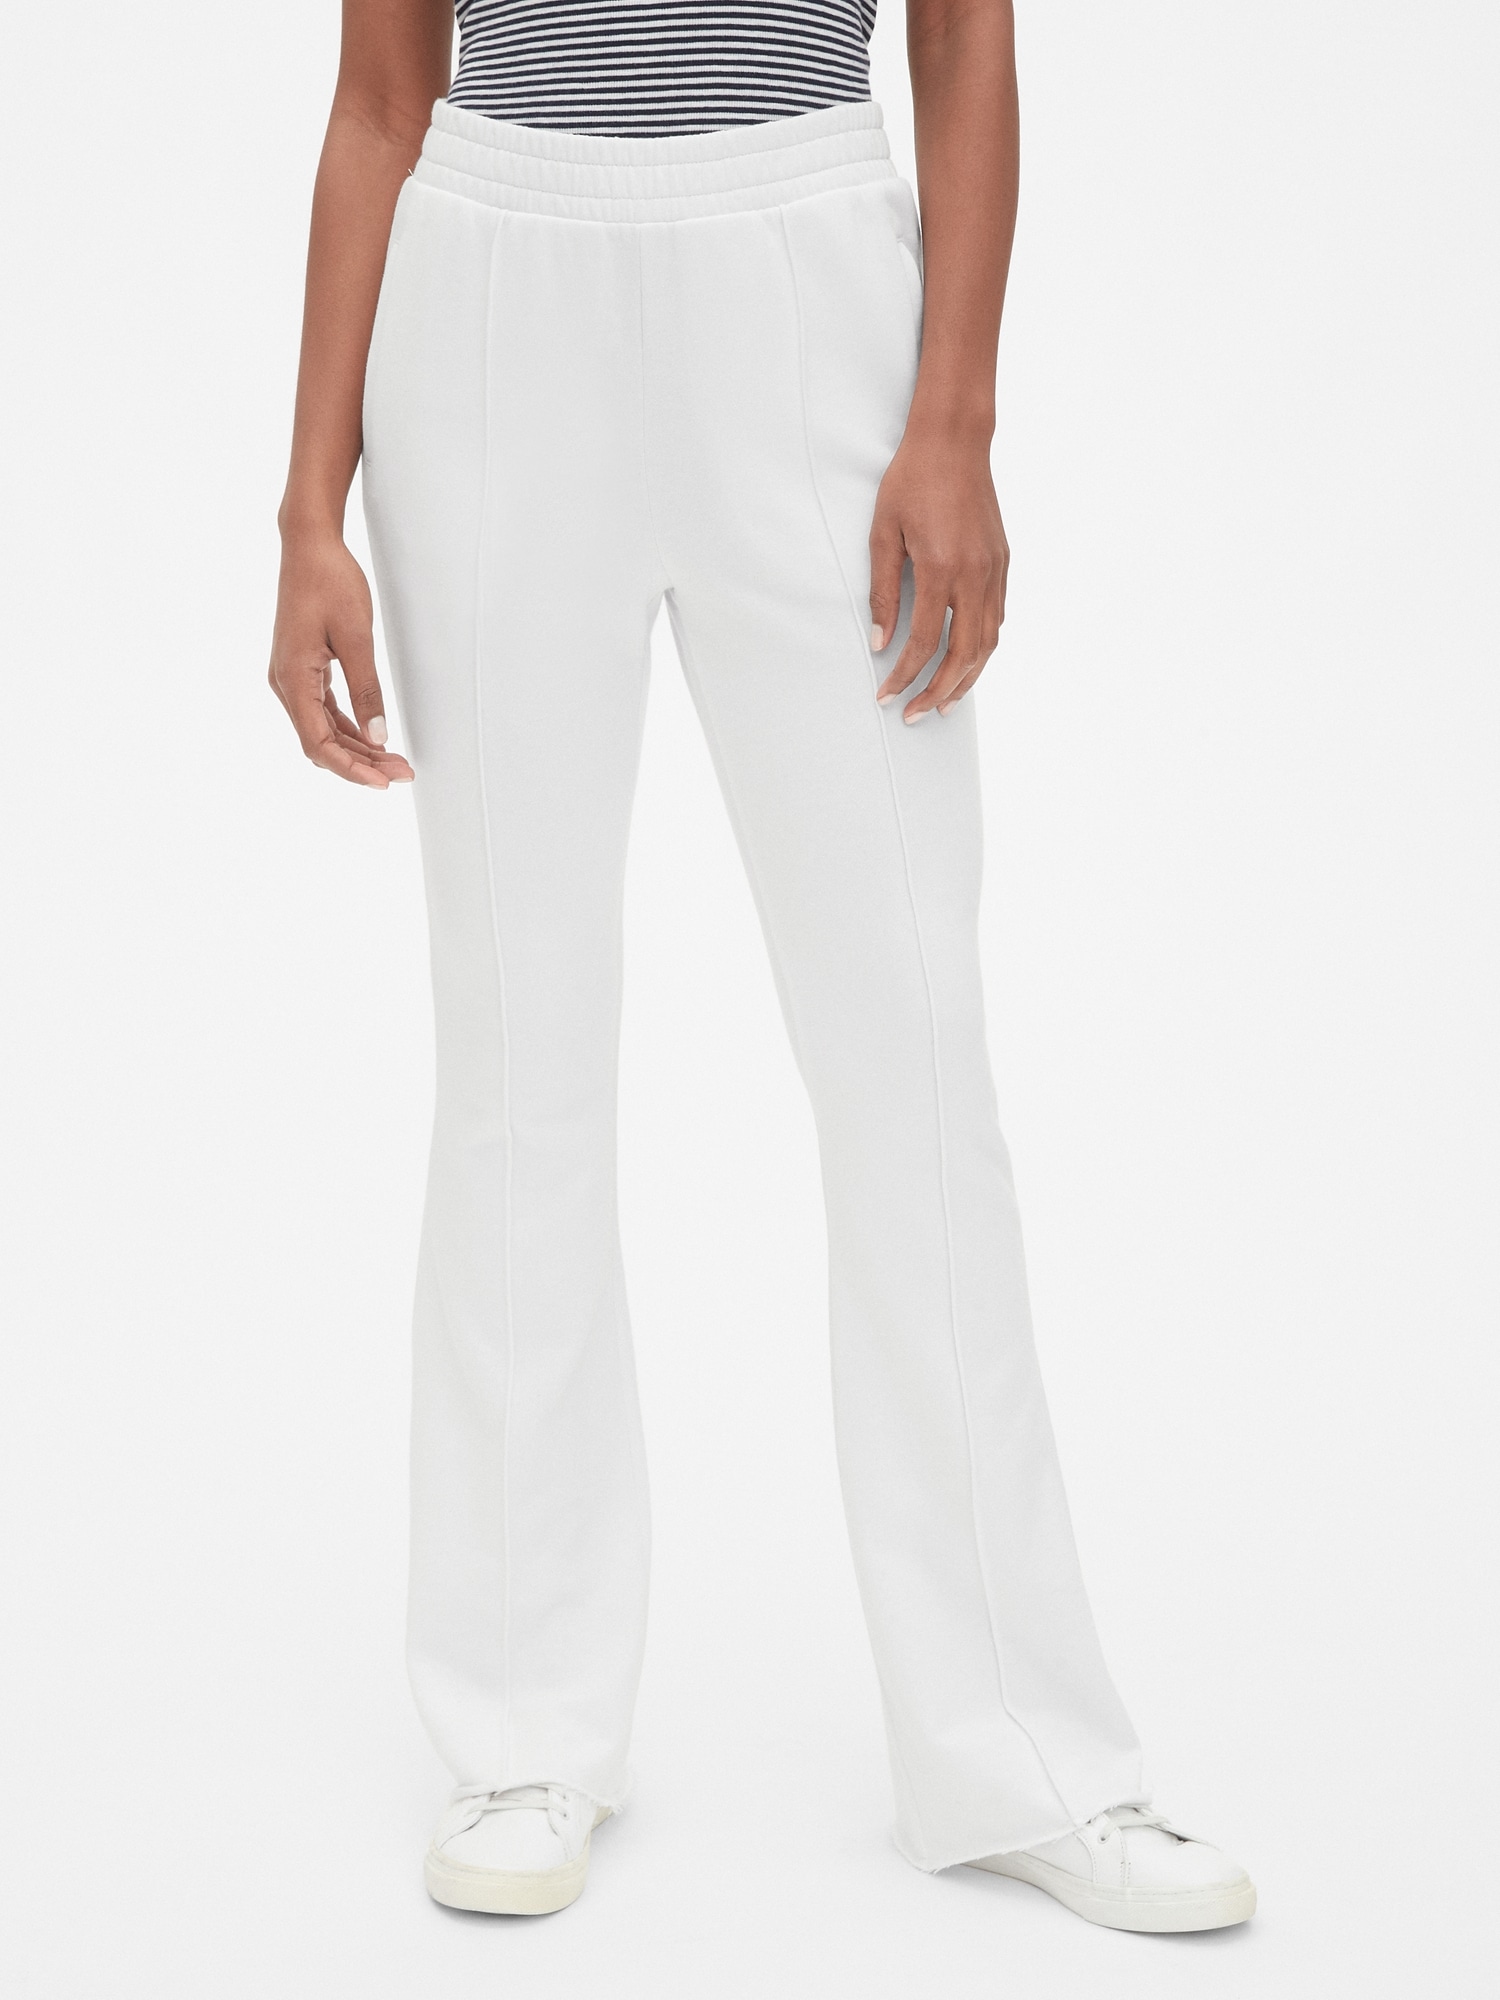 Flare Pintuck Track Pants in French Terry | Gap